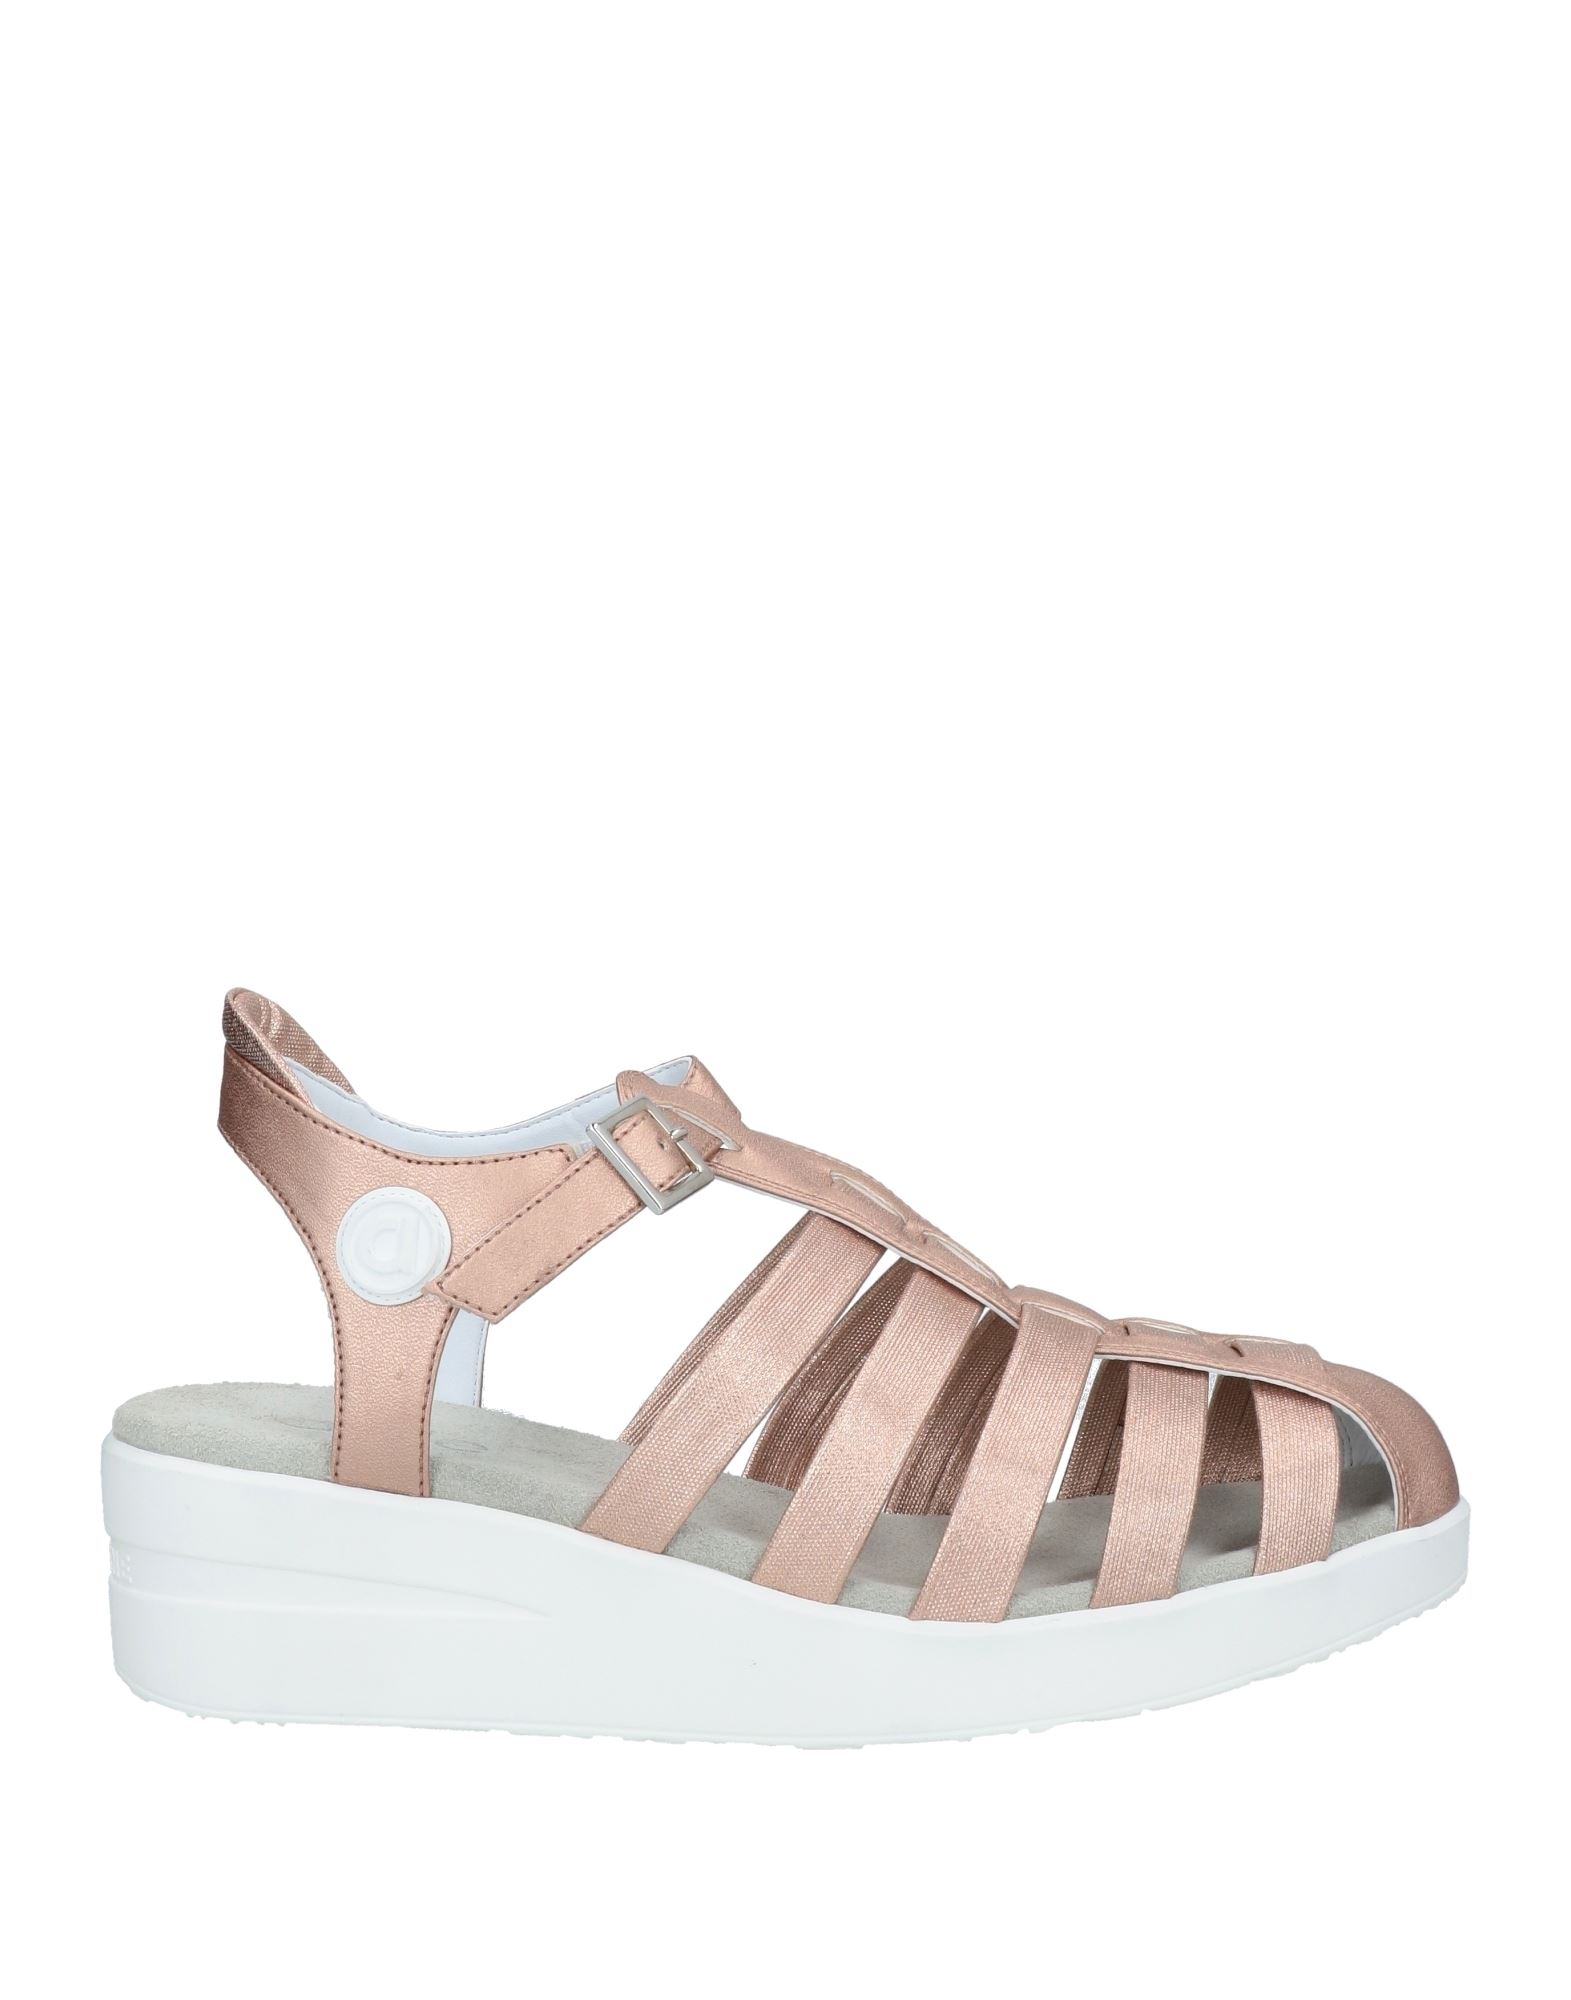 Agile By Rucoline Sandals In Bronze